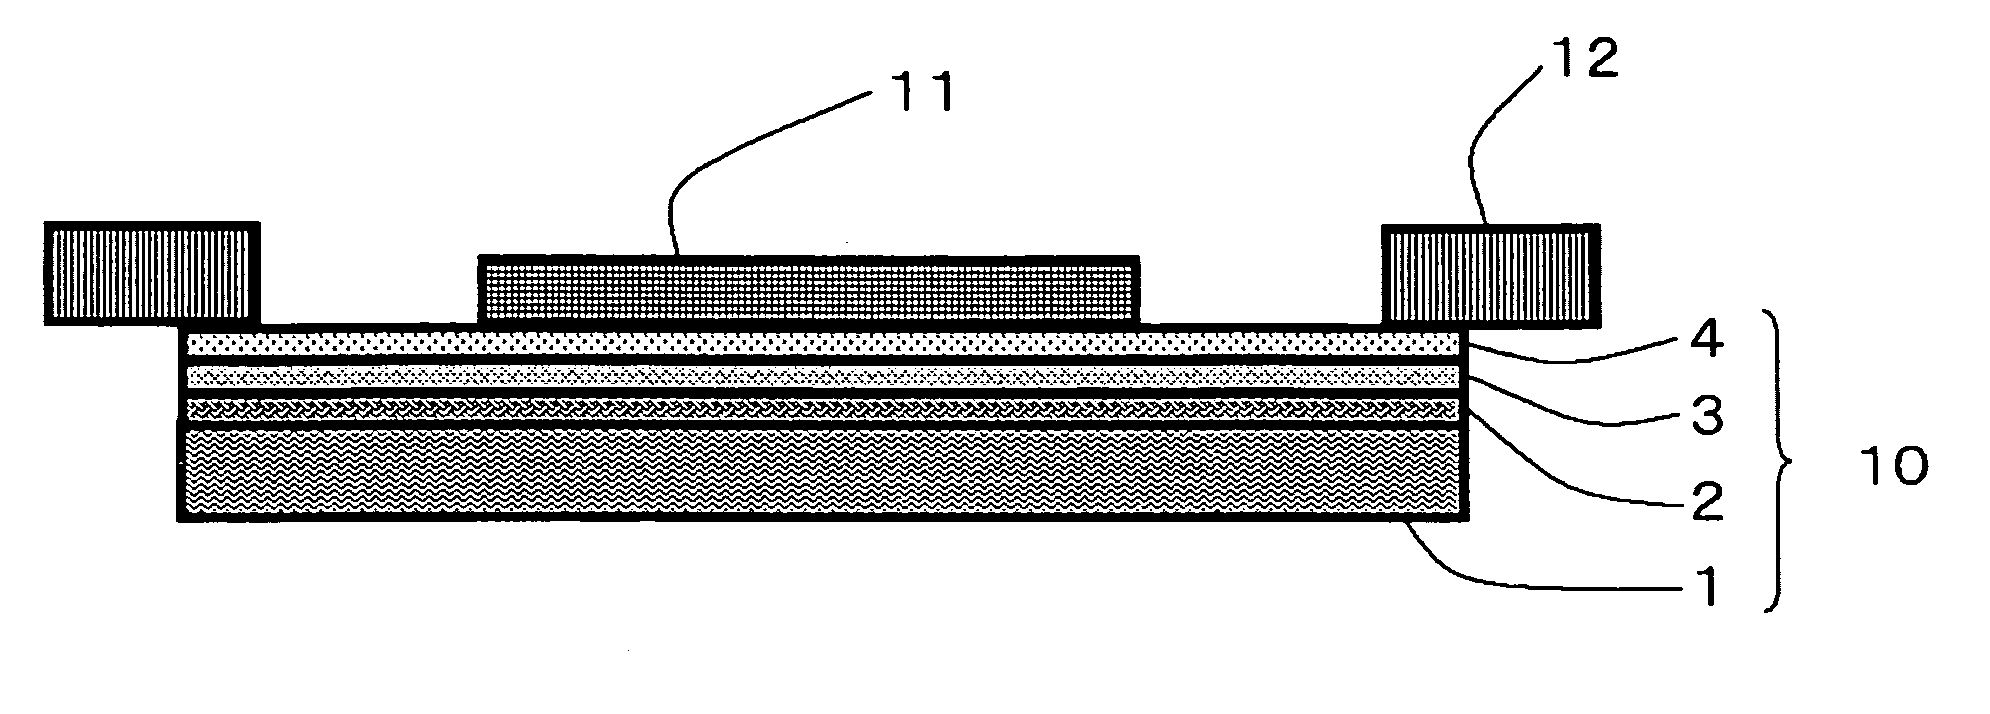 Wafer-processing tape